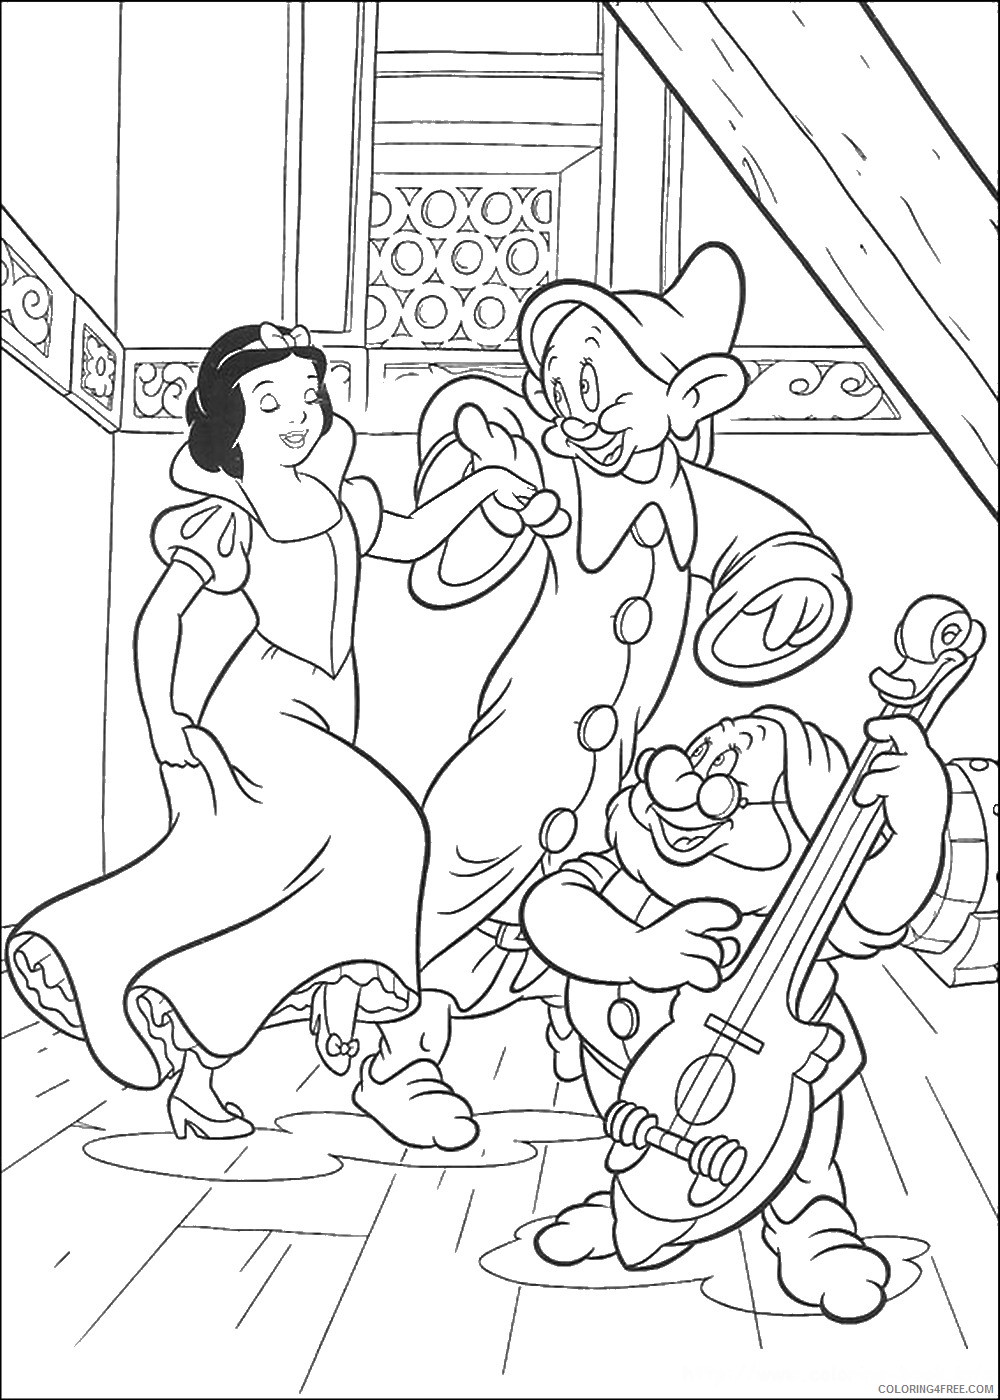 Snow White Coloring Pages Cartoons snow_white_cl_71 Printable 2020 5746 Coloring4free